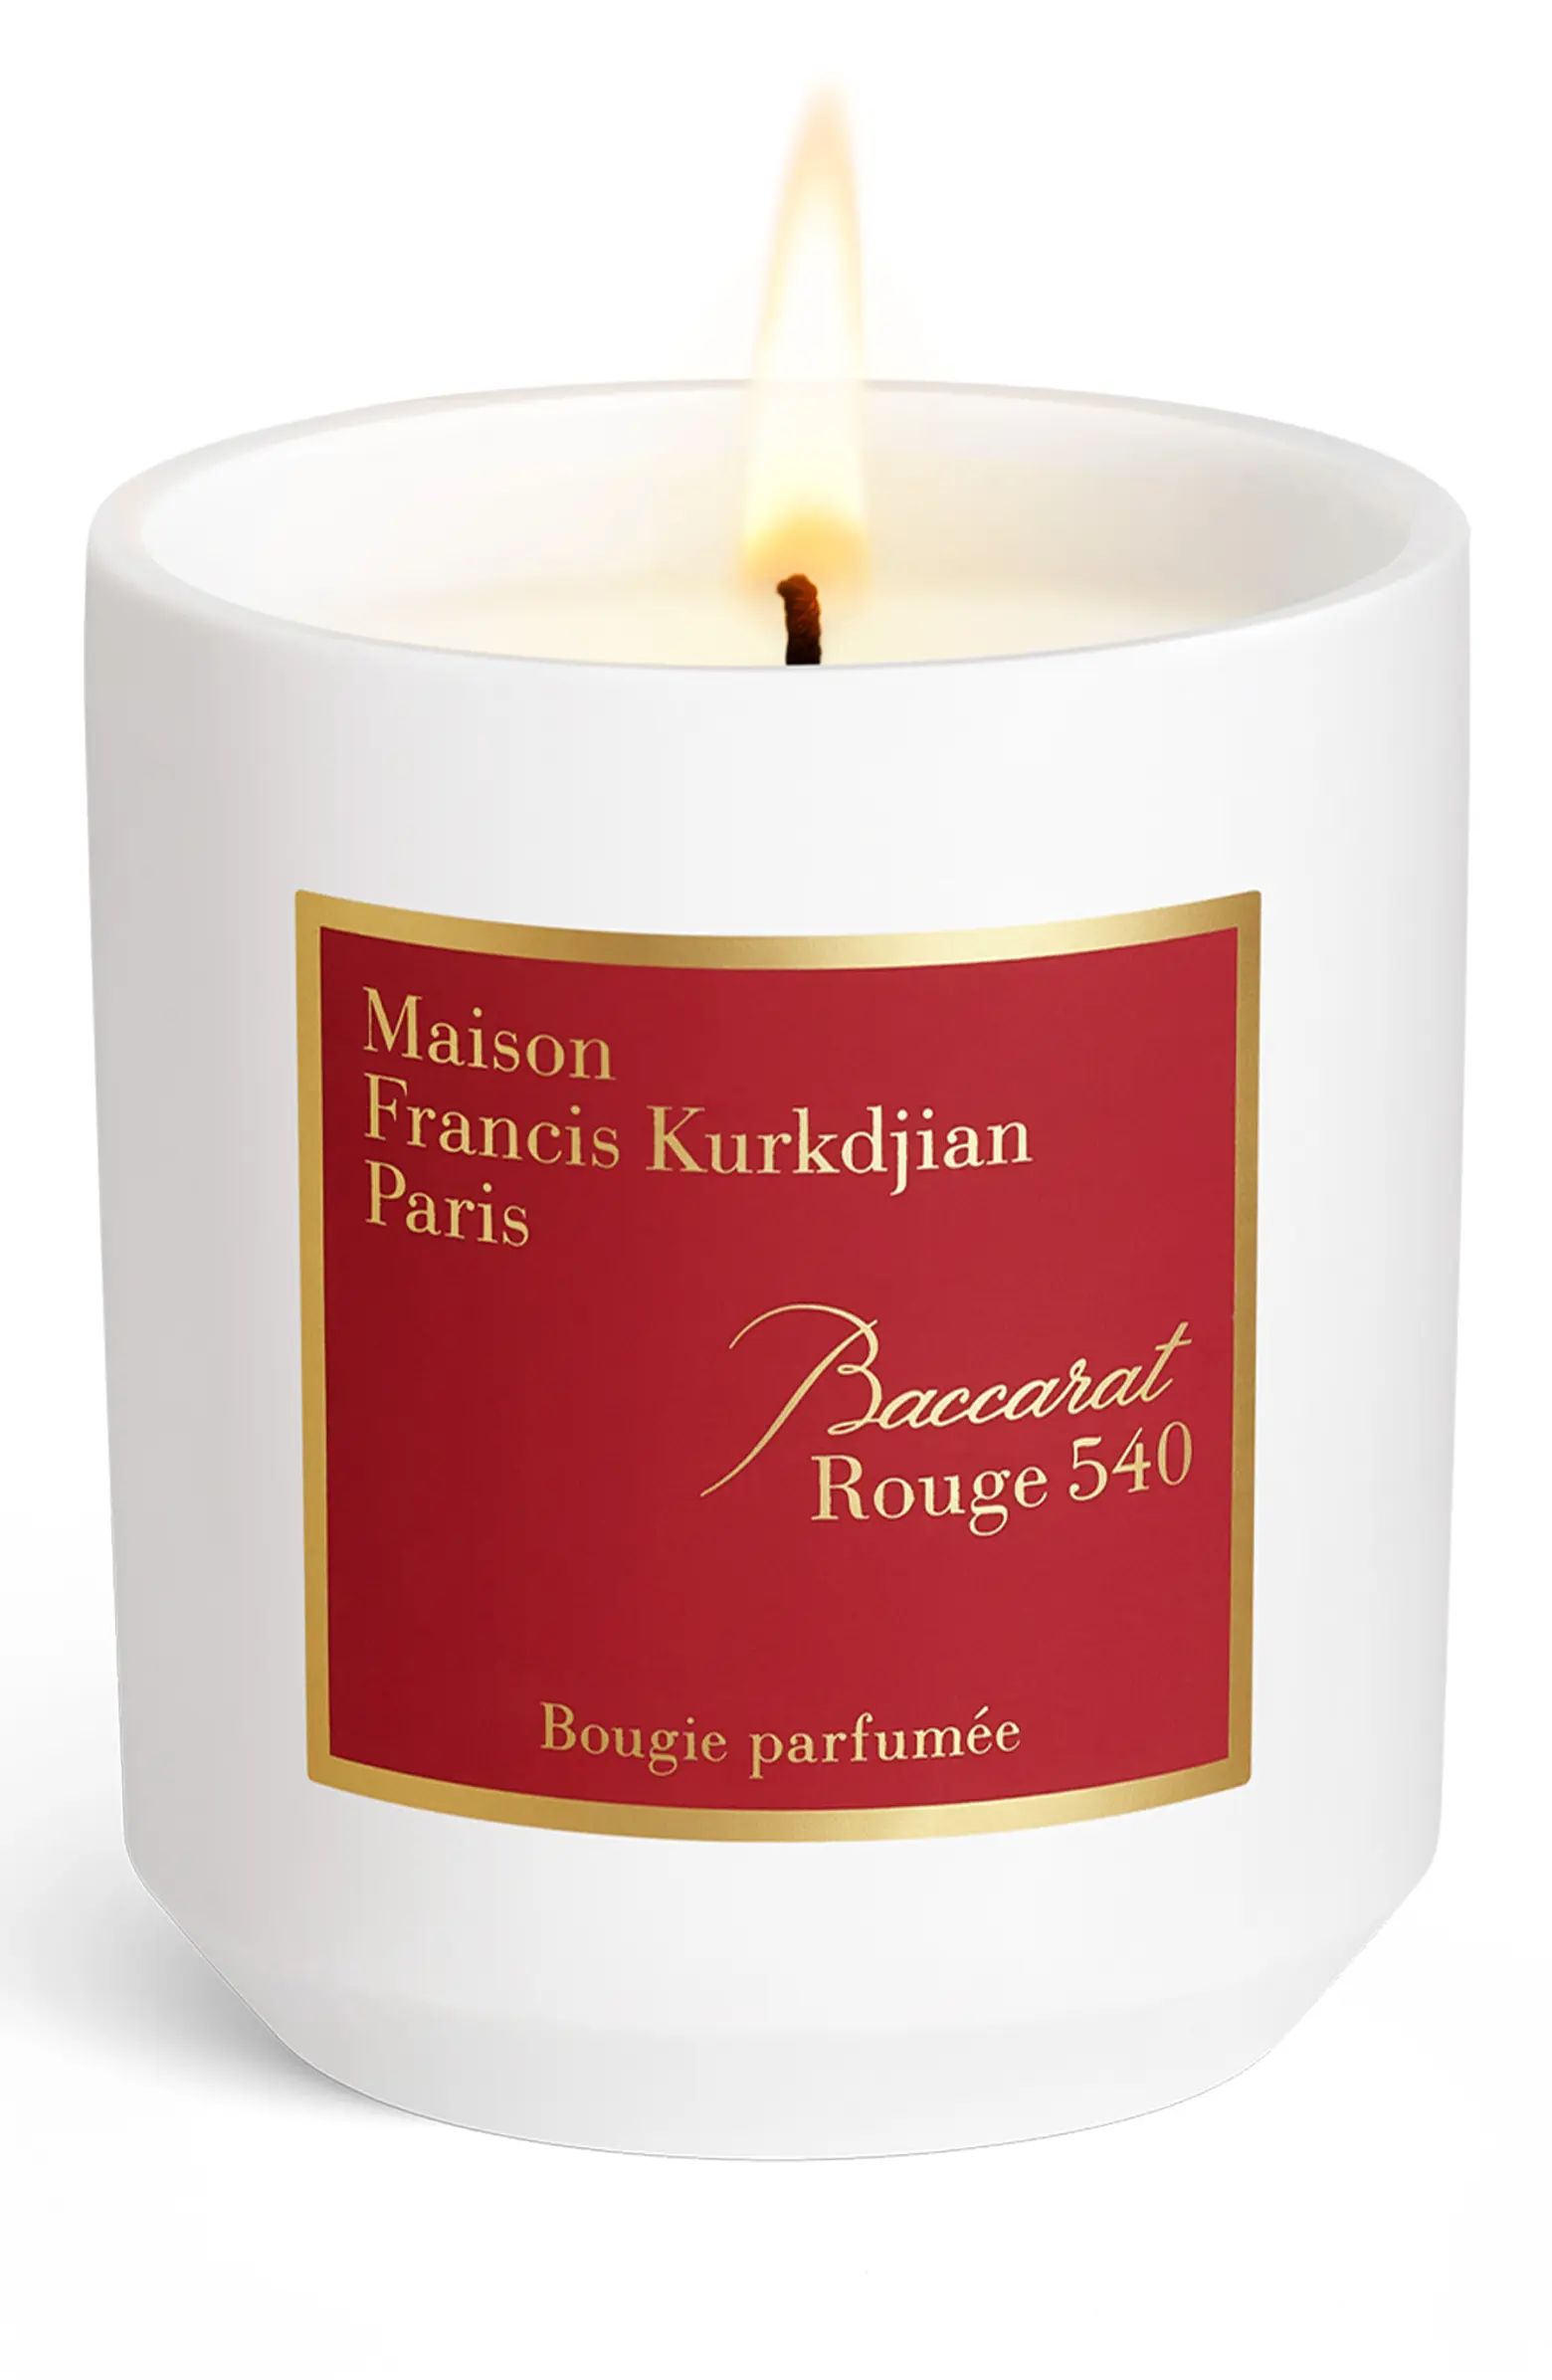 Maison Francis Kurkdjian Baccarat Rouge 540 Scented Candle | Nordstrom | Nordstrom